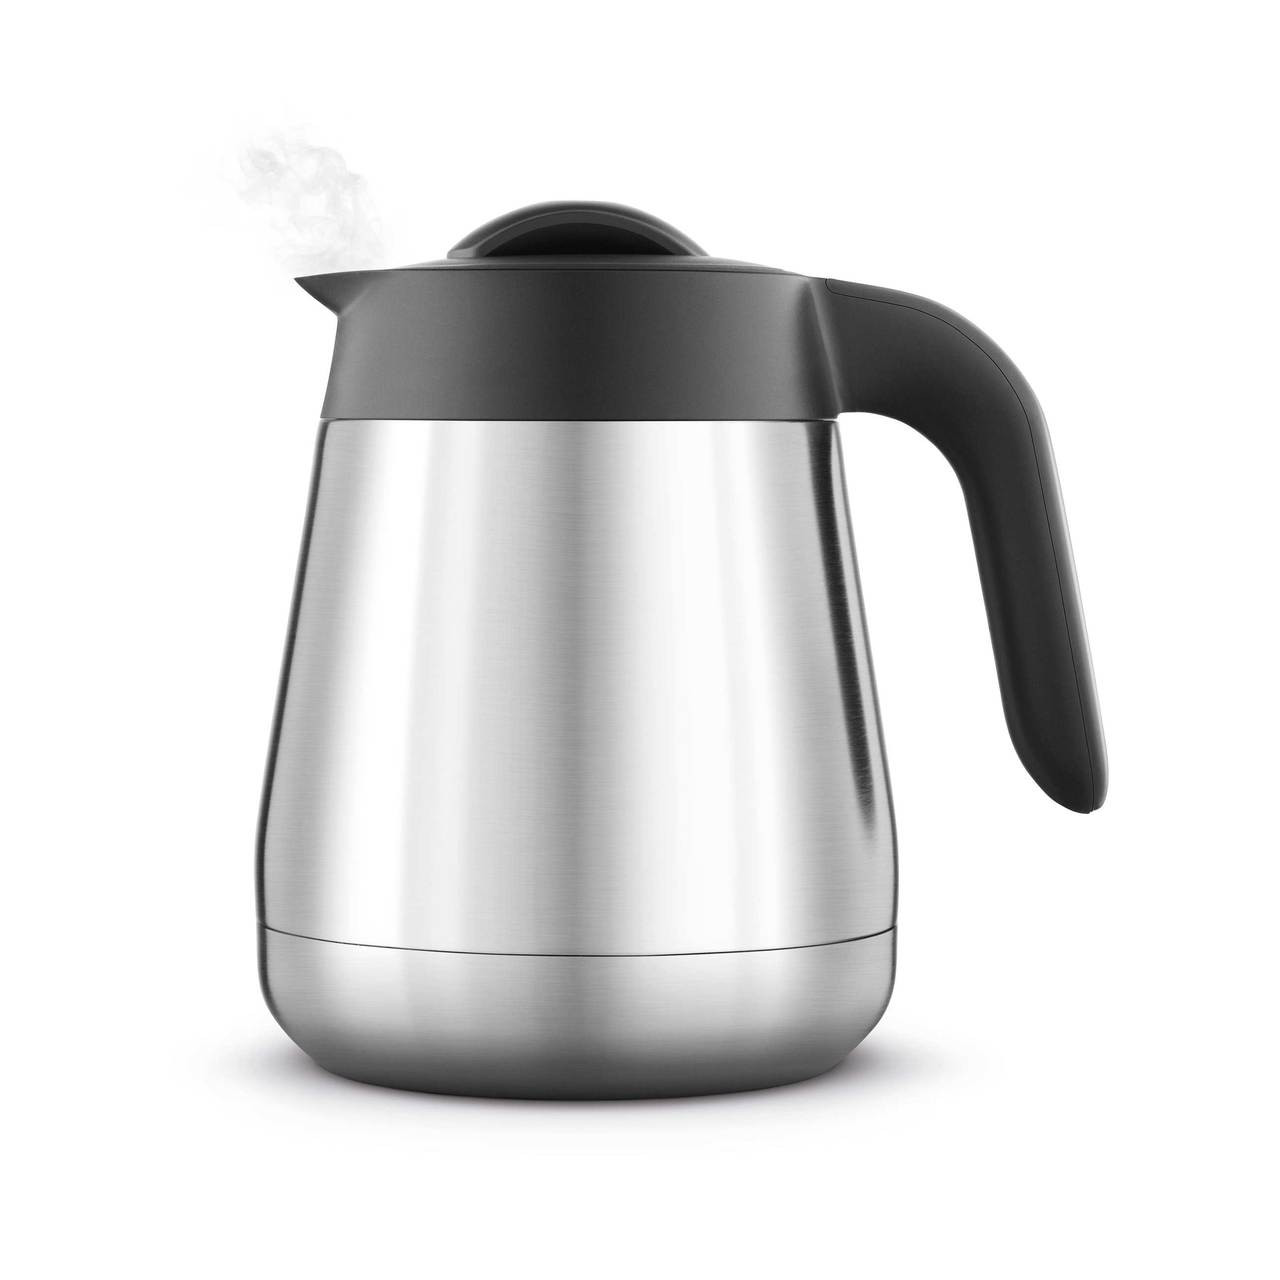 Breville One-touch Tea Maker -Just kettle Carafe - Replacement